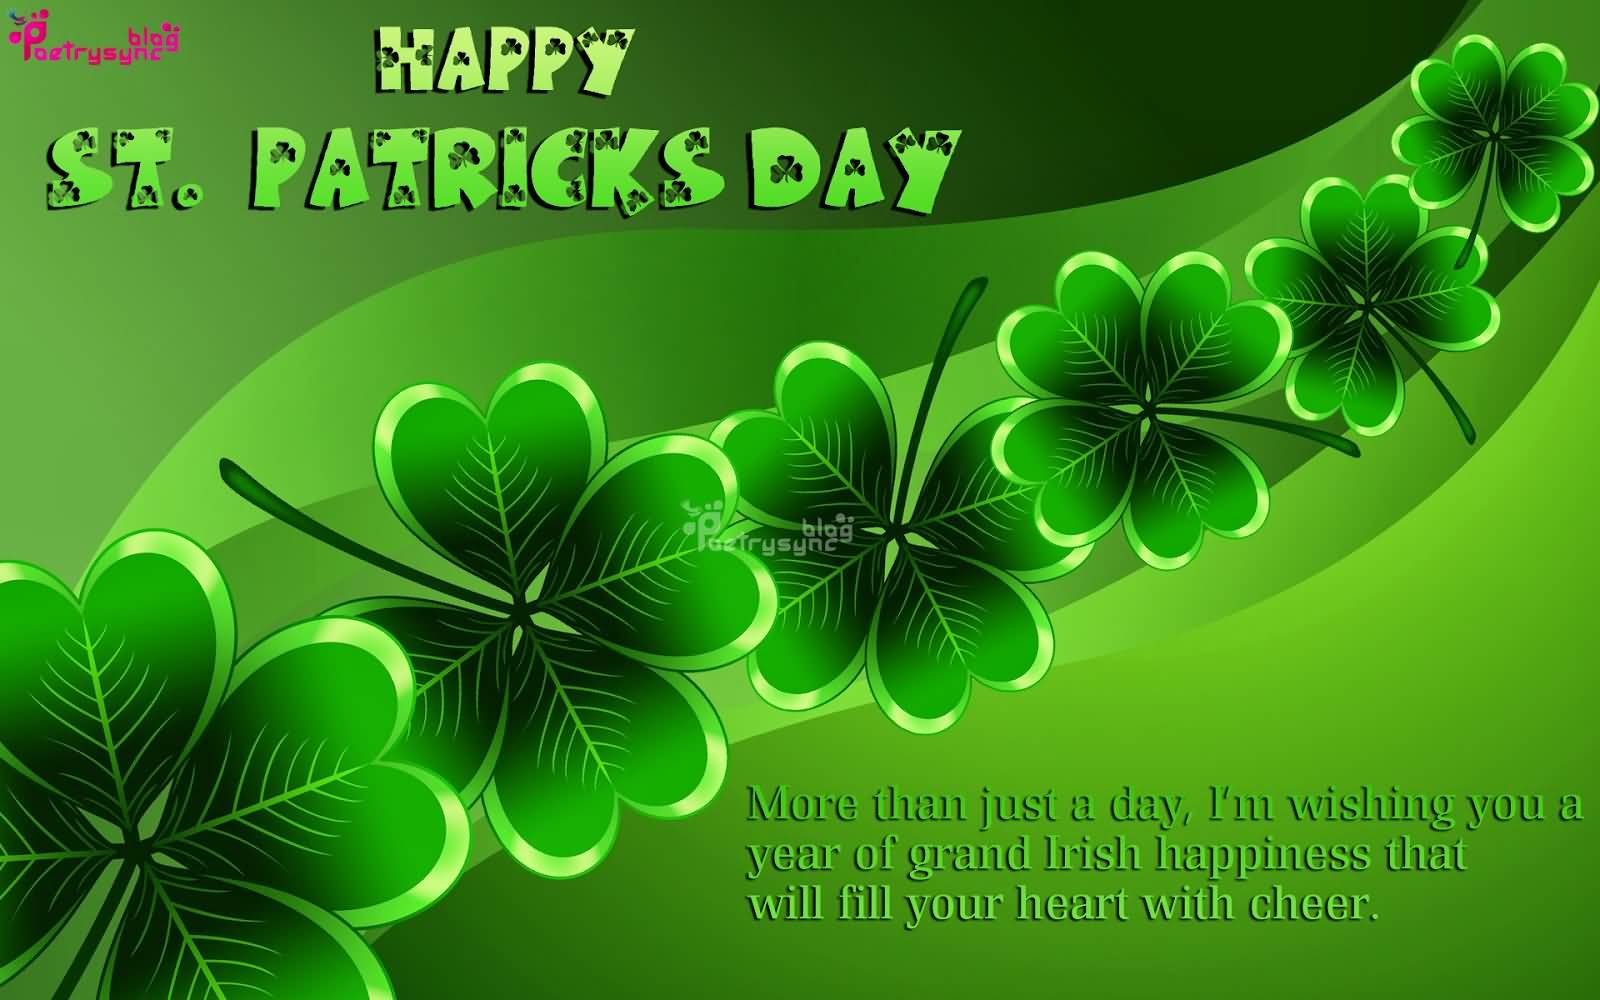 Happy Saint Patrick's Day More Than Just A Day, I'm Wishing You A Year Of Grand Irish Happiness That Will Fill Your Heart With Cheer